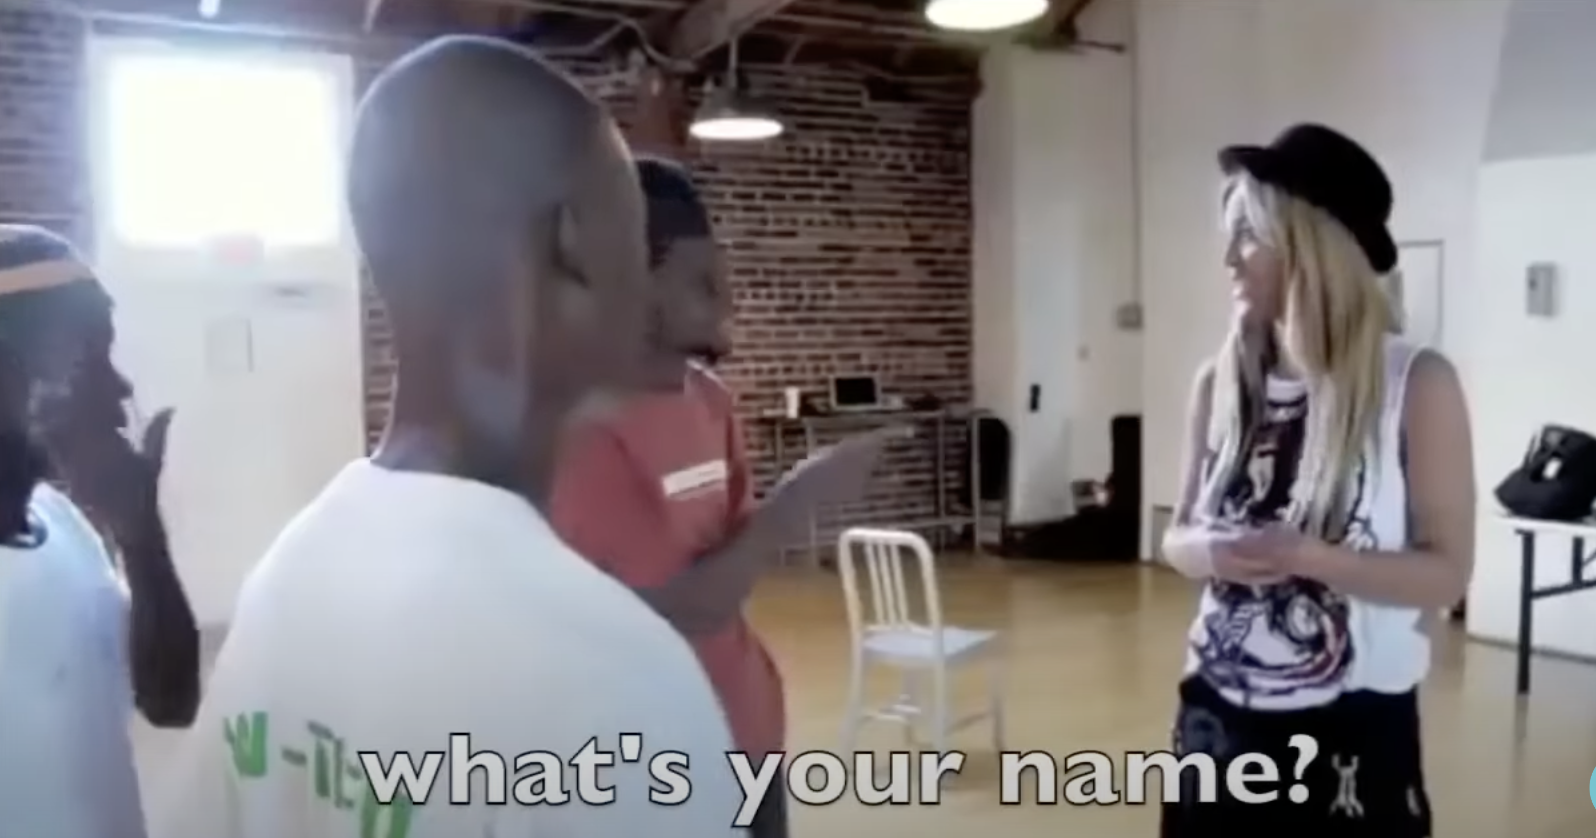 Someone asking Beyoncé what her name is